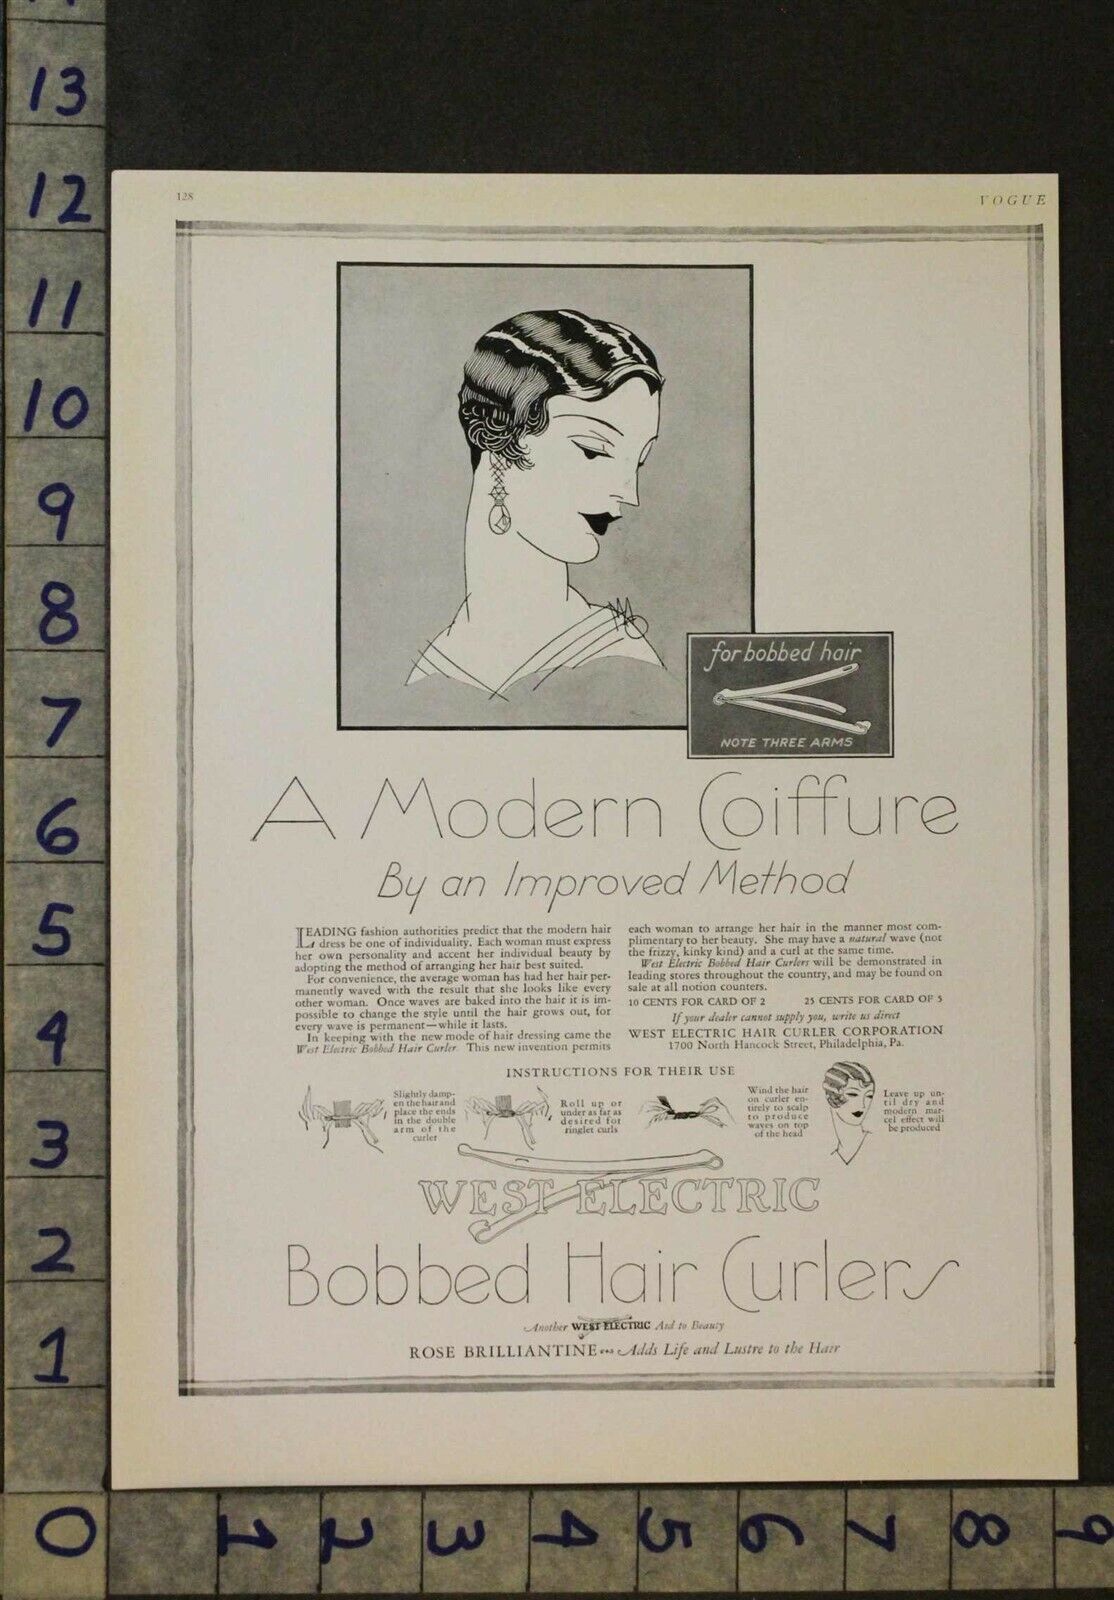 1926 WEST ELECTRIC BOBBED HAIR CURLER COIFFURE ART DECO FLAPPER BEAUTY AD 25155*